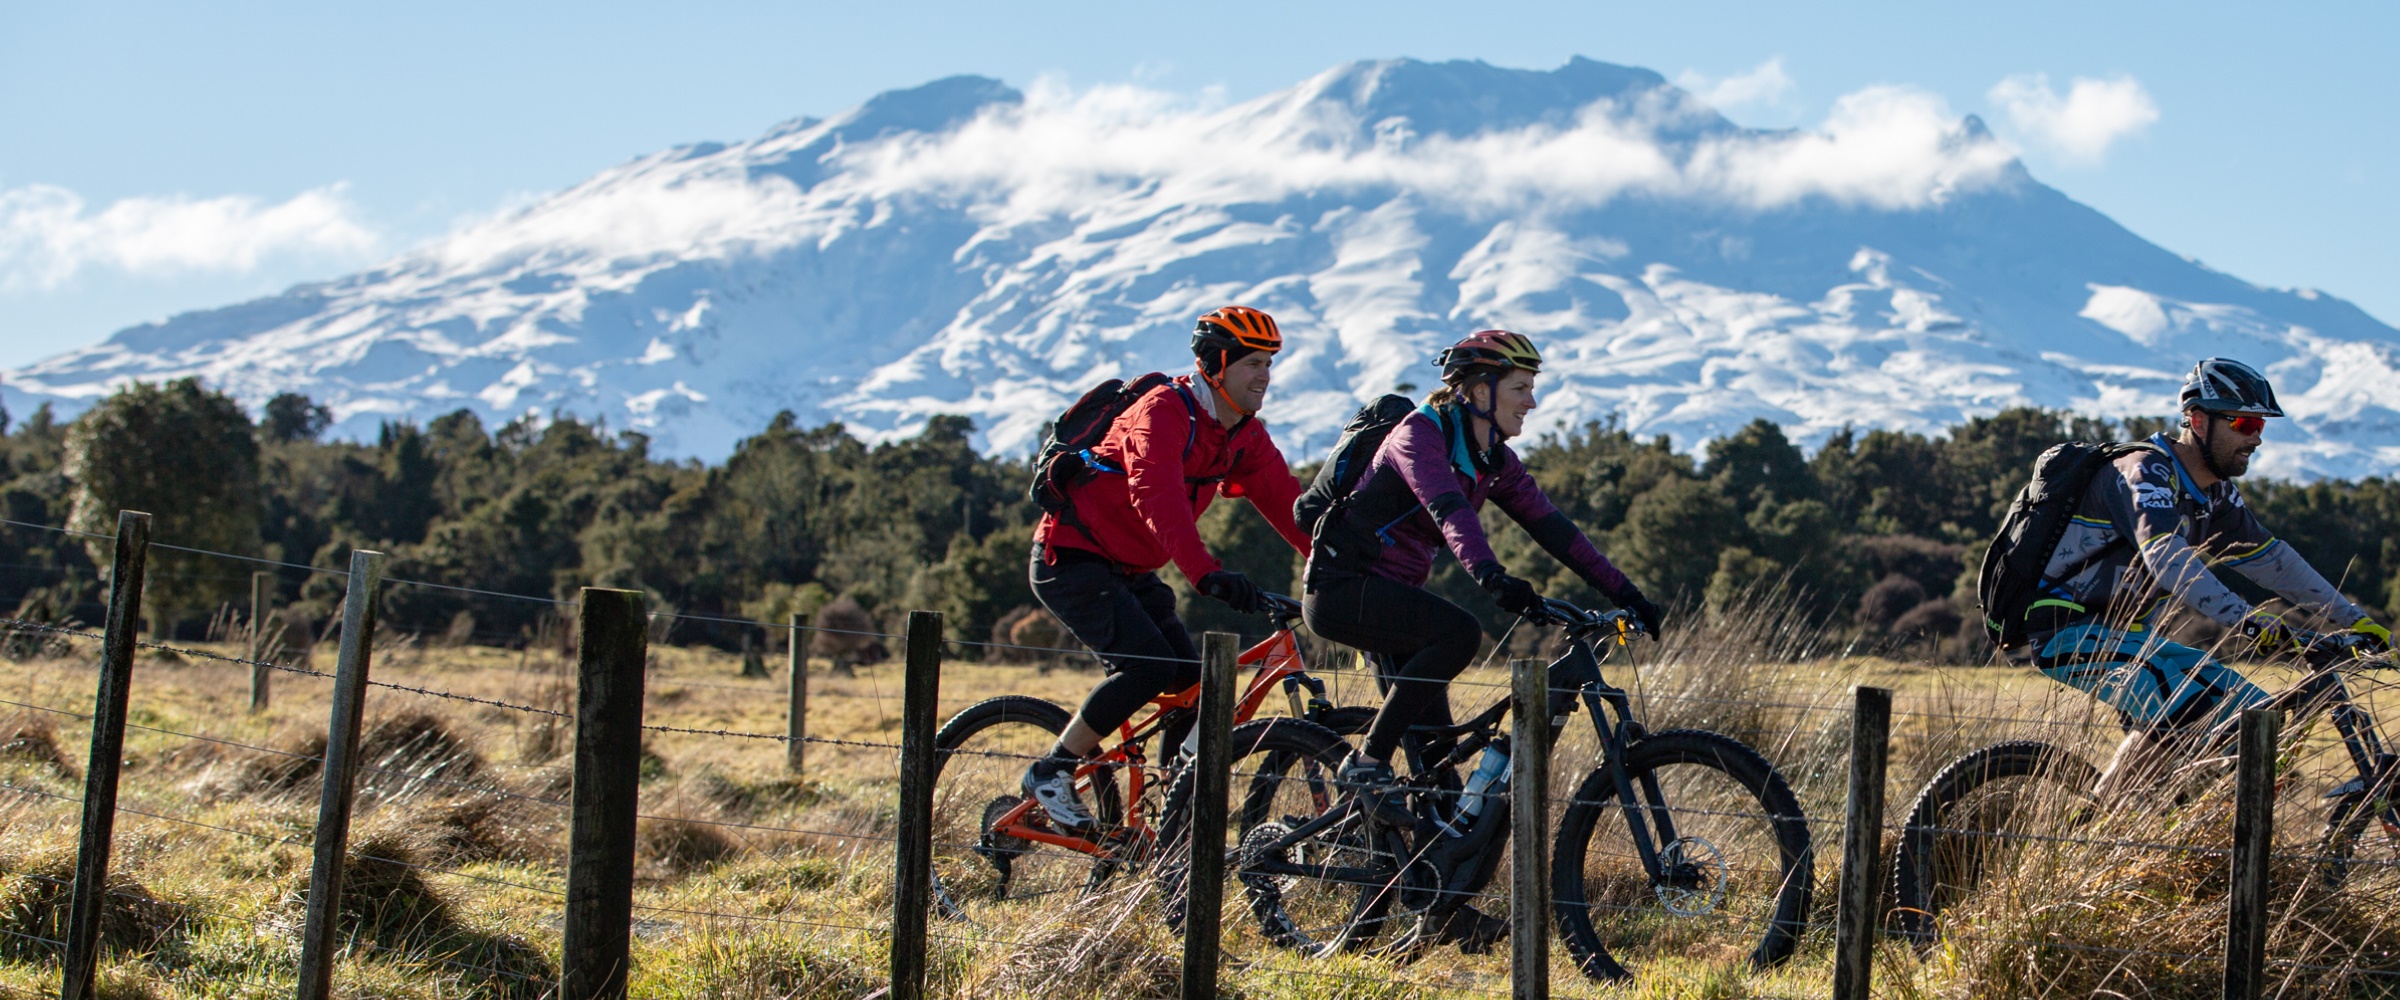 People on mountain bikes on Ohakune Old Coach Road with Mt Ruapehu covered in snow in the background.